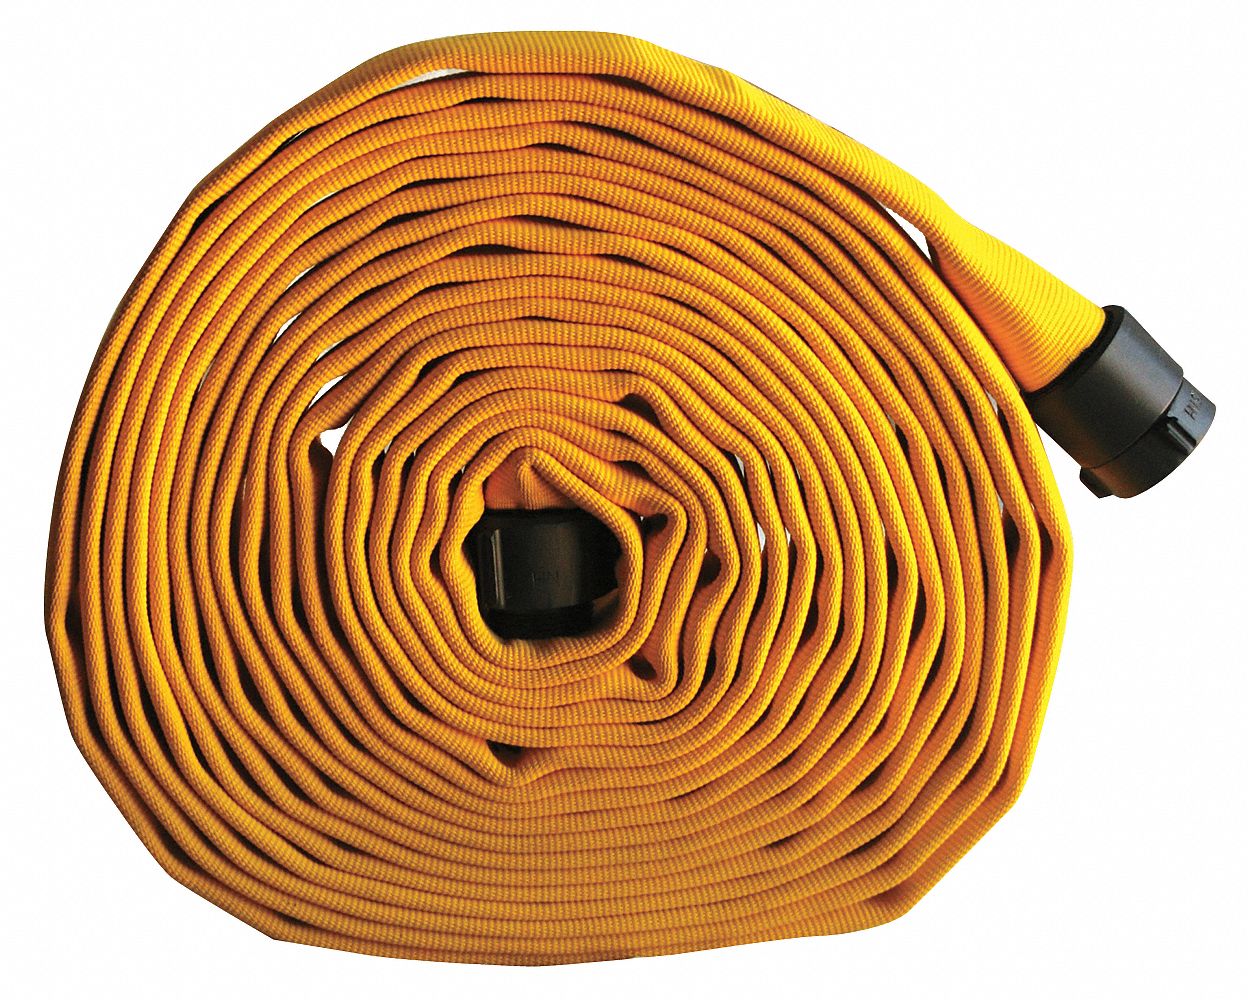 Attack Line Fire Hose: 1 1/2 in Hose Inside Dia., Polyurethane, 50 ft Hose Lg, Yellow, Double Jacket